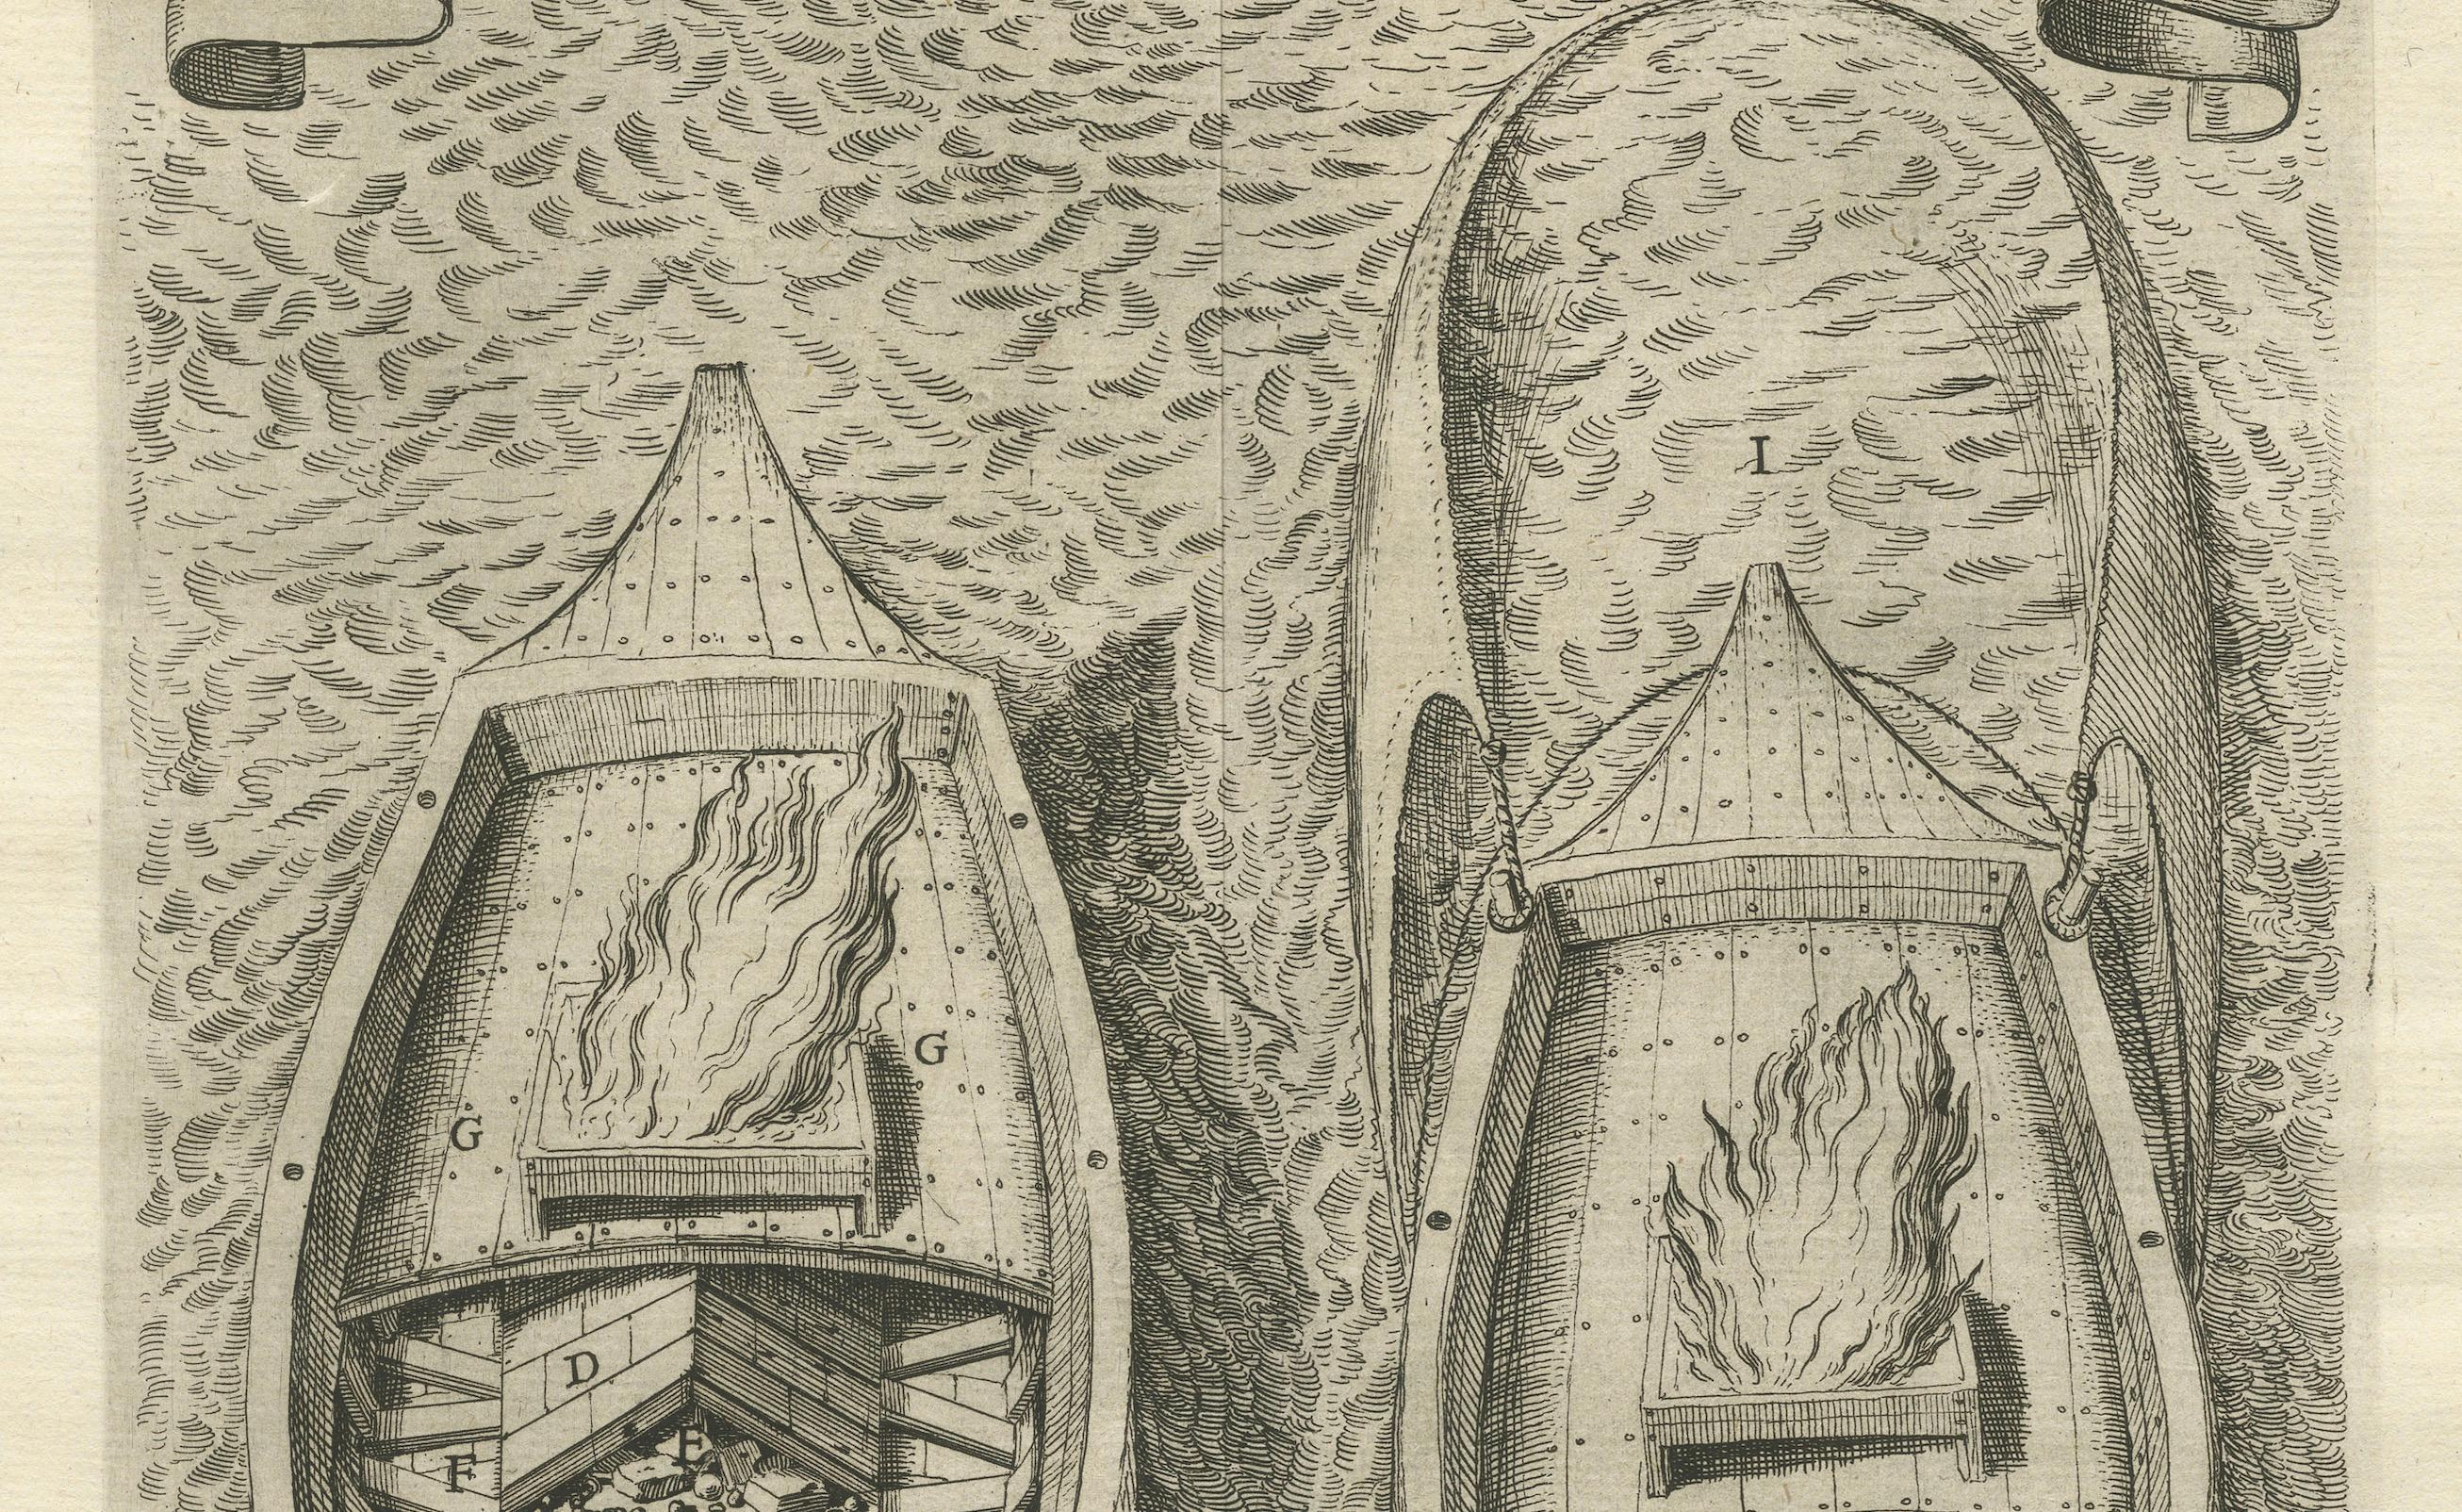 This original engraving is referring depicting a detailed illustration of a fire ship, a type of naval vessel used as a weapon during the Eighty Years' War. 

Fire ships were essentially floating bombs, filled with combustibles and explosives, and